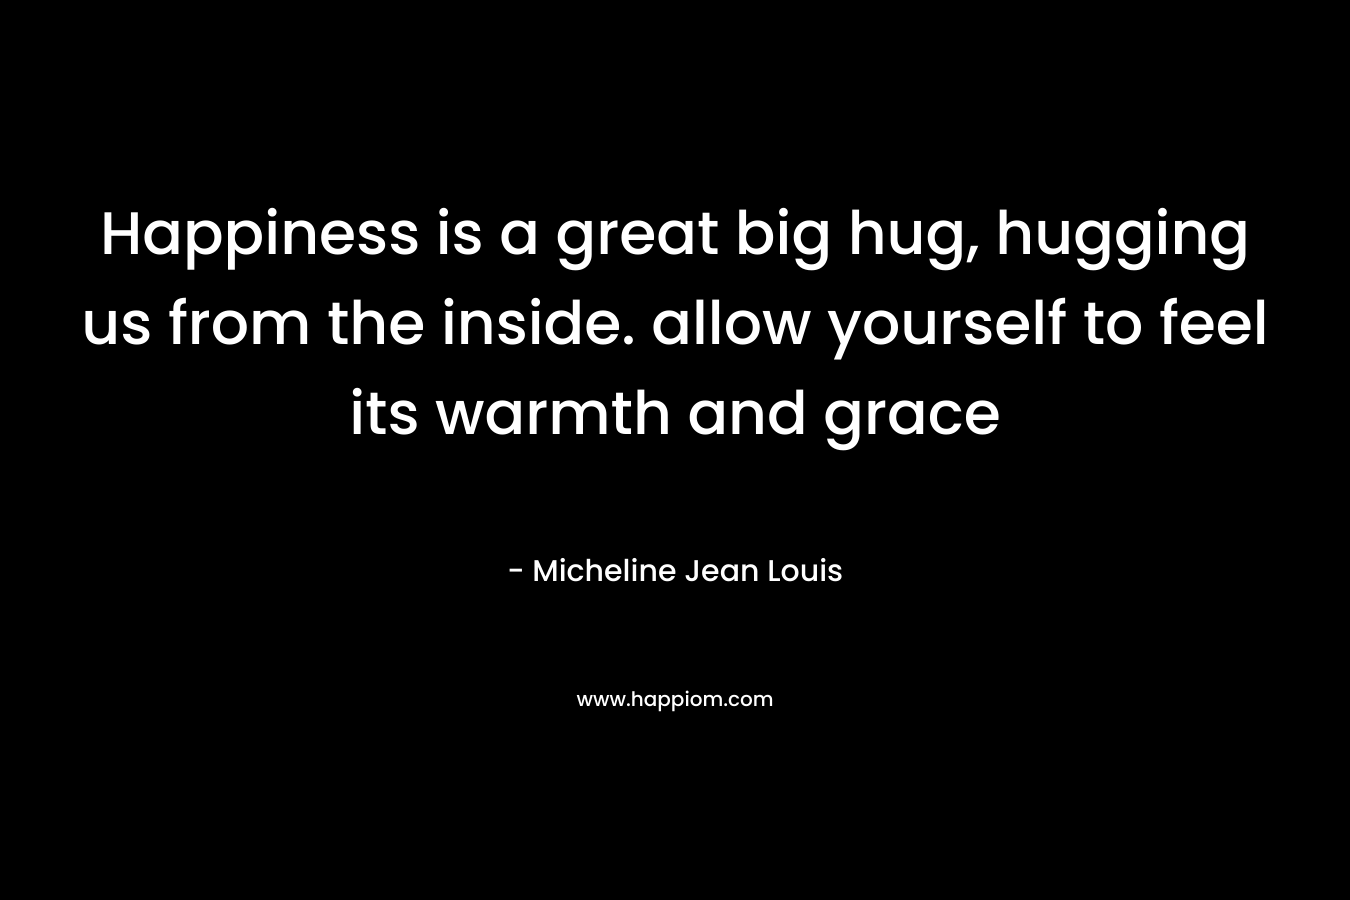 Happiness is a great big hug, hugging us from the inside. allow yourself to feel its warmth and grace – Micheline Jean Louis